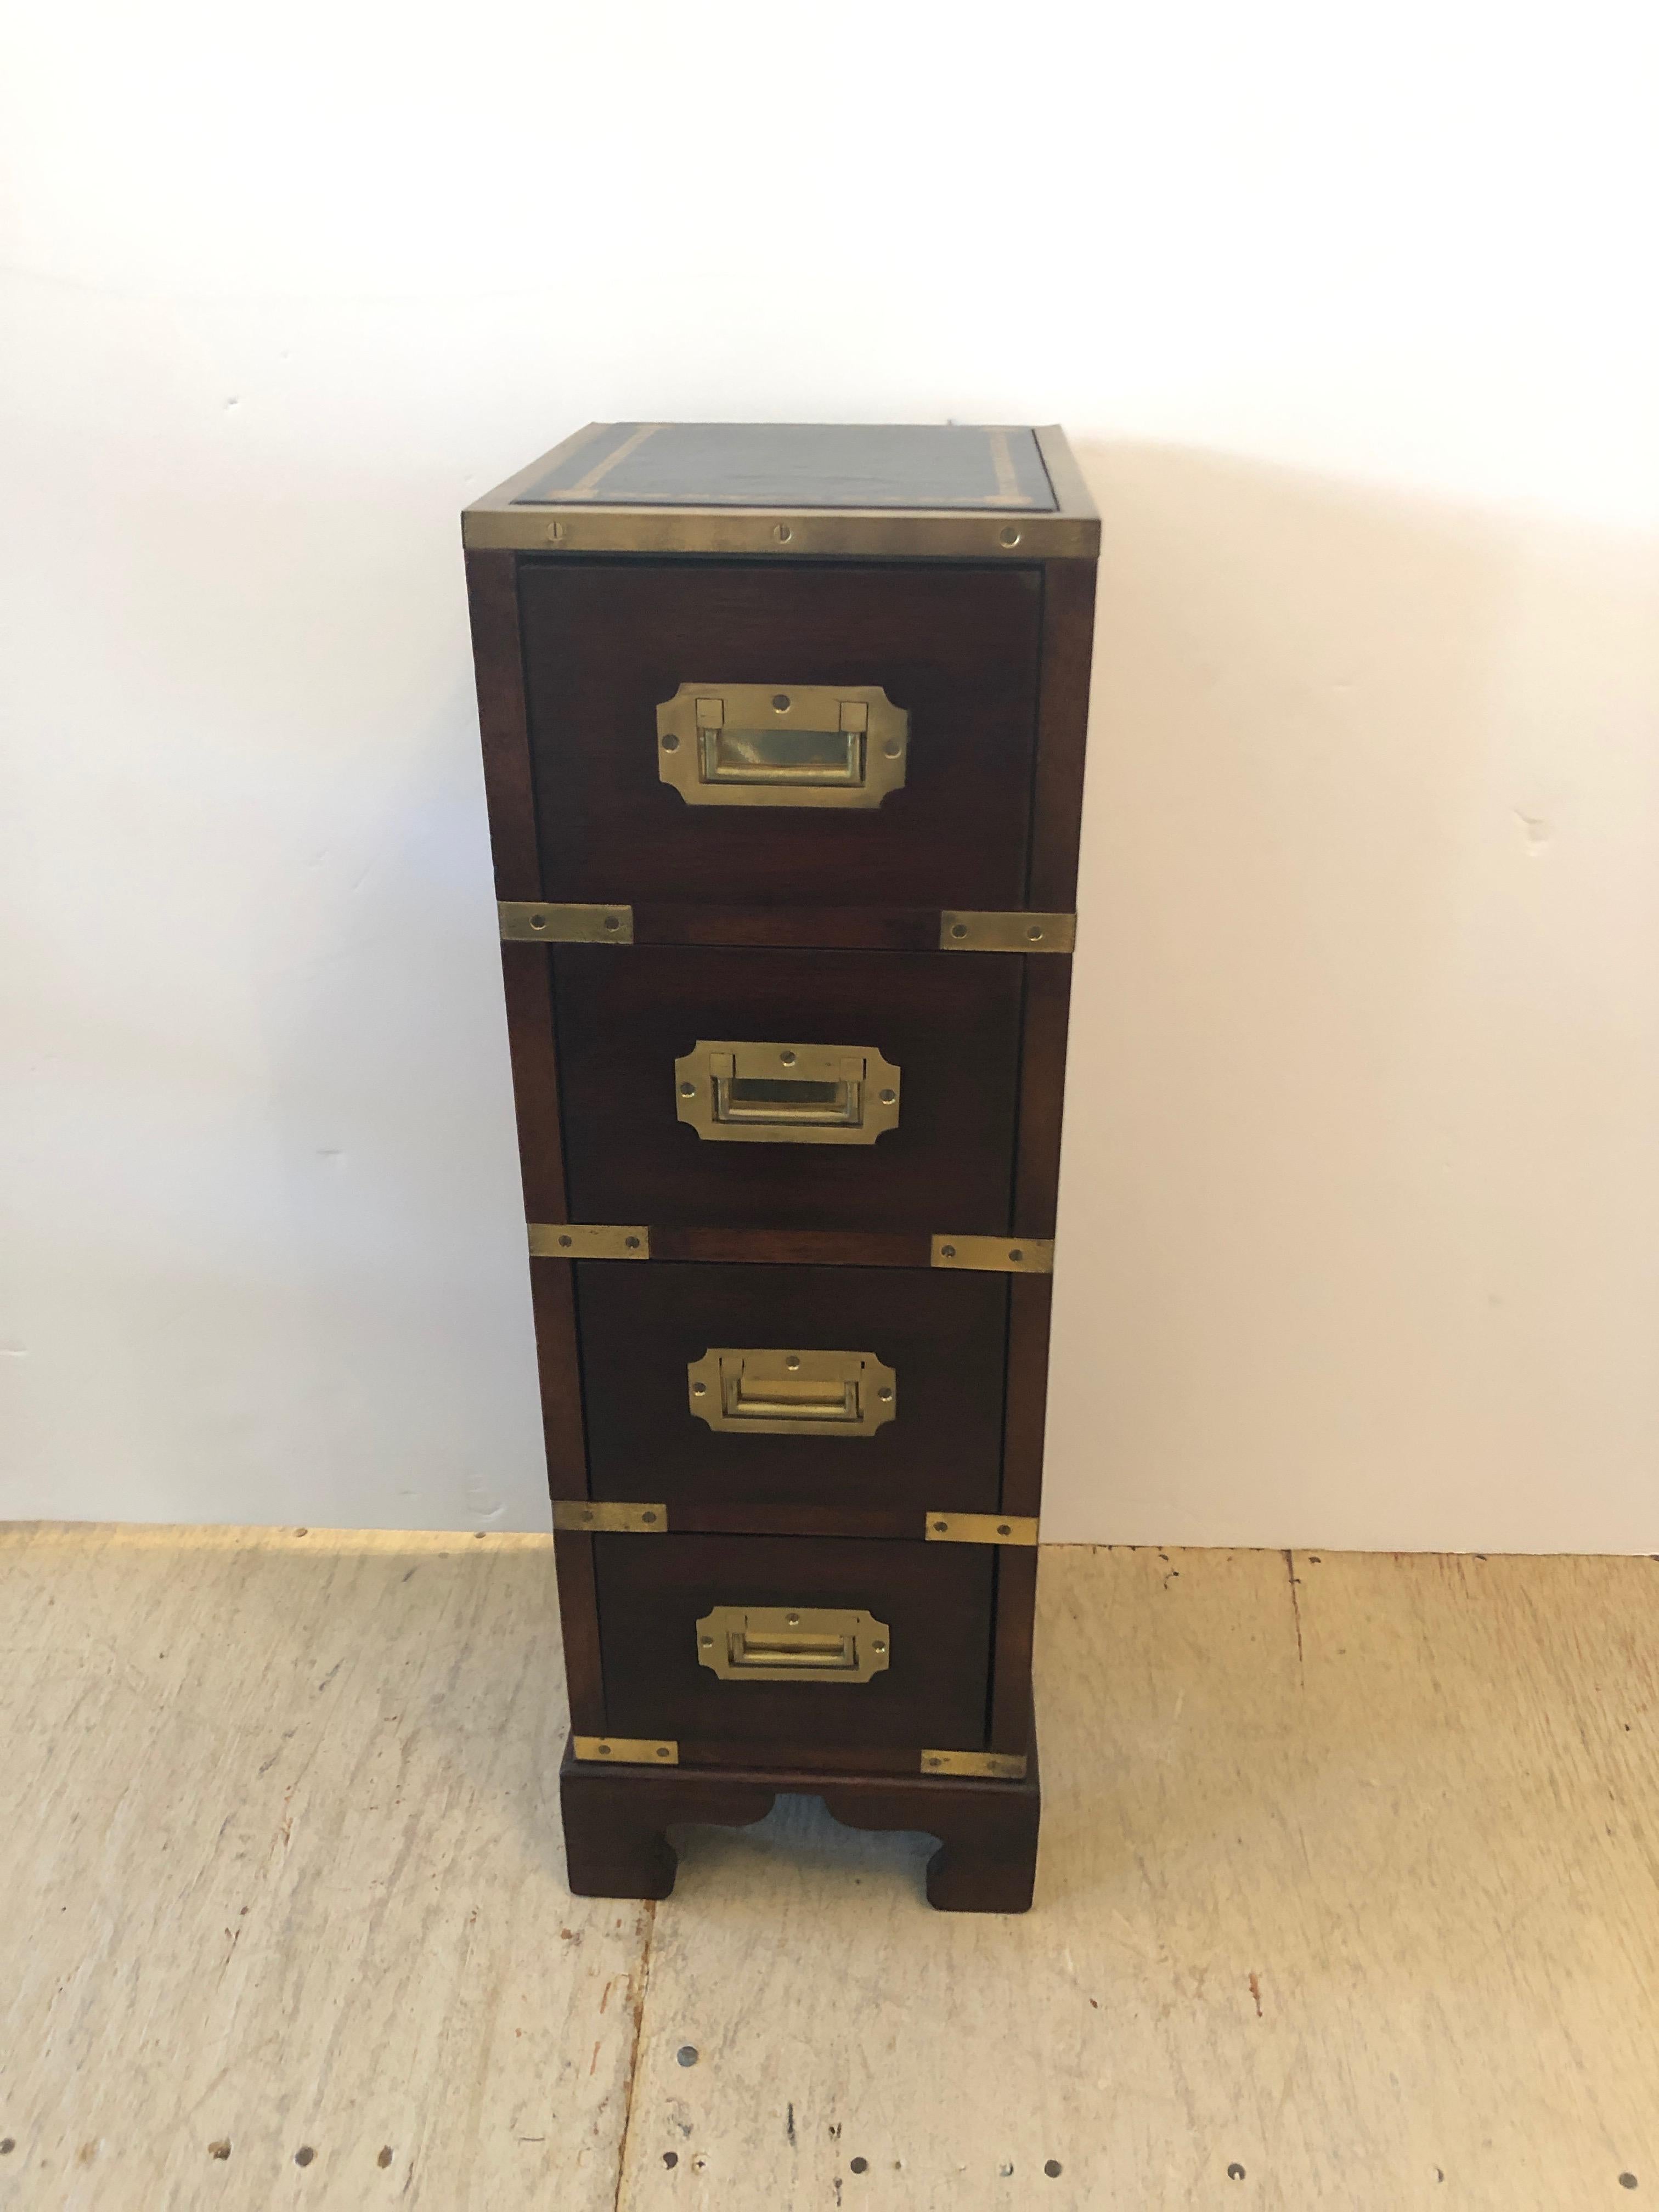 An amazing elegant tall narrow mahogany Campaign chest or side table having 4 stacked drawers with Classic recessed brass hardware and details topped off with a handsome black and gold tooled leather top framed by a brass gallery. A rare jewel in